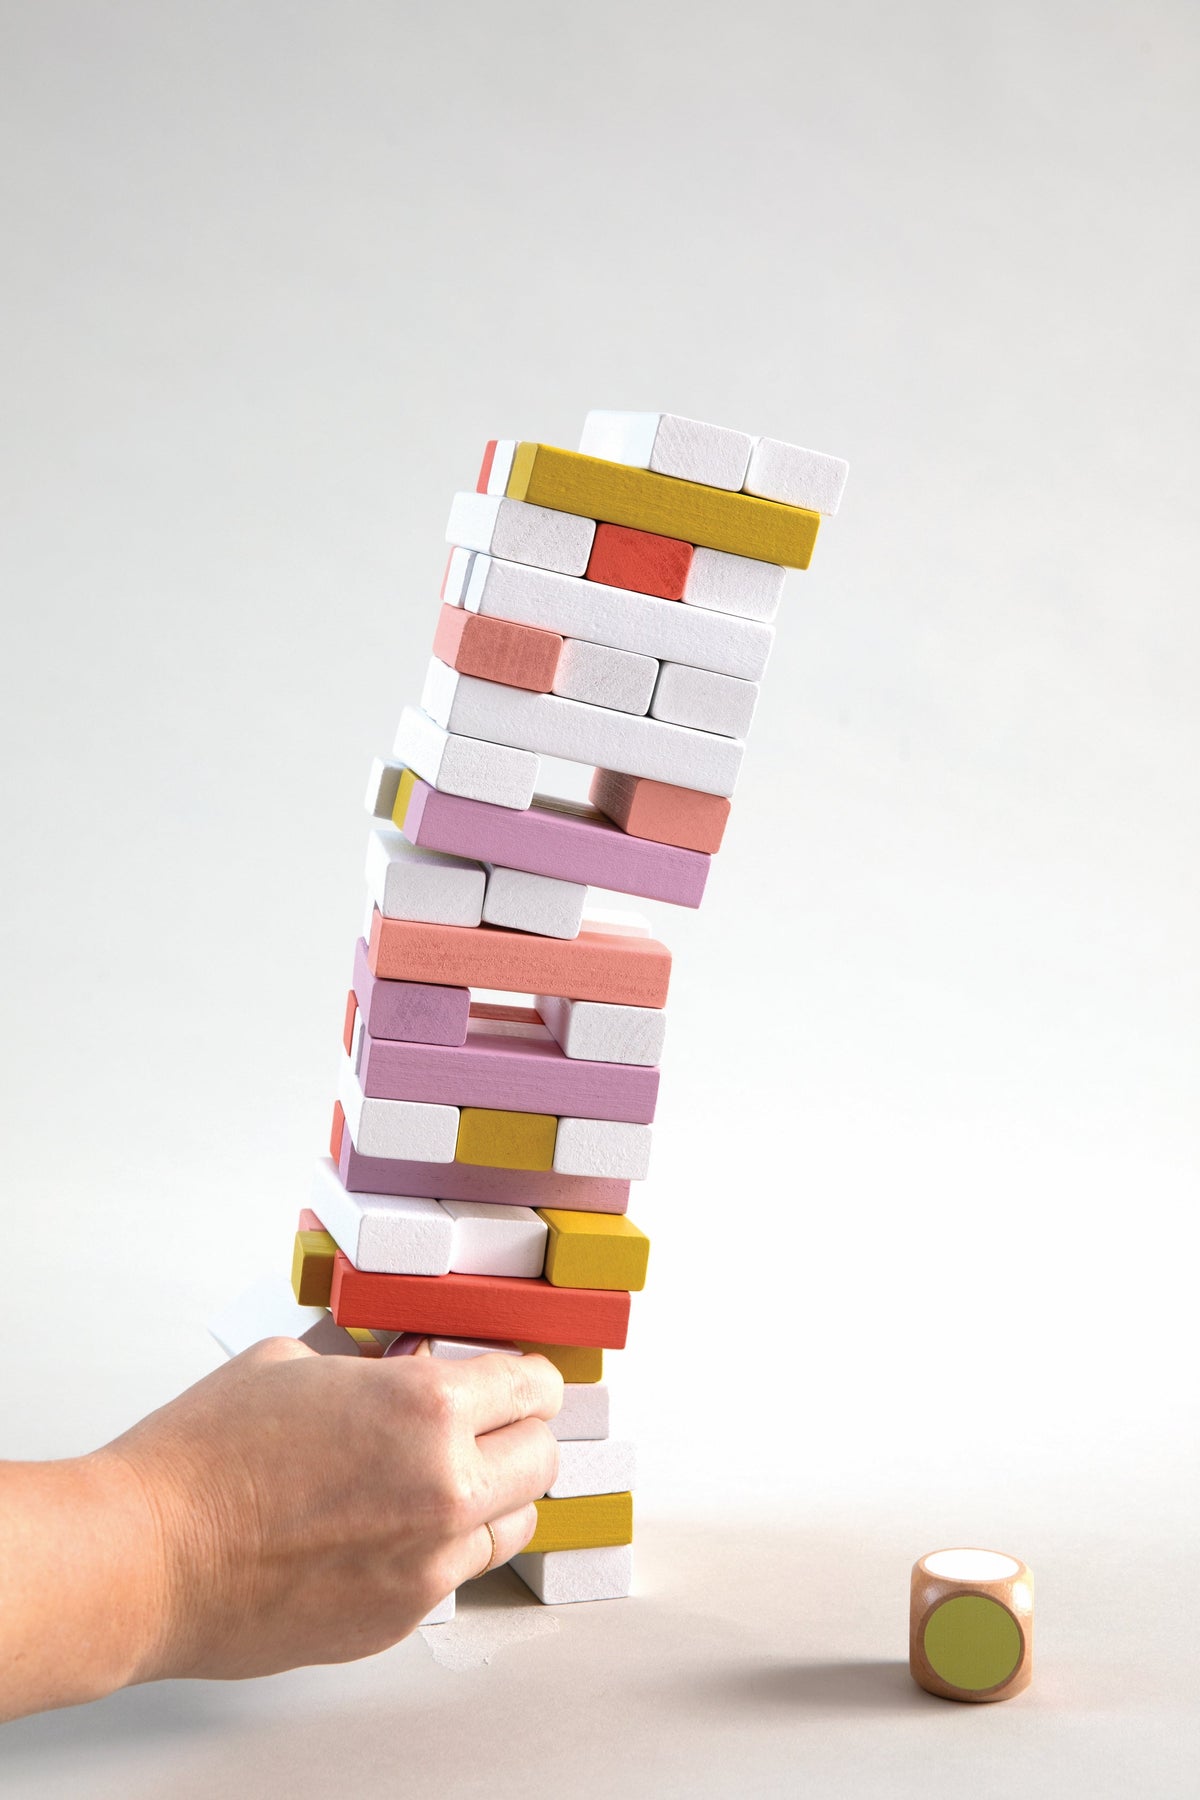 Library Of Games - Tumbling Tower